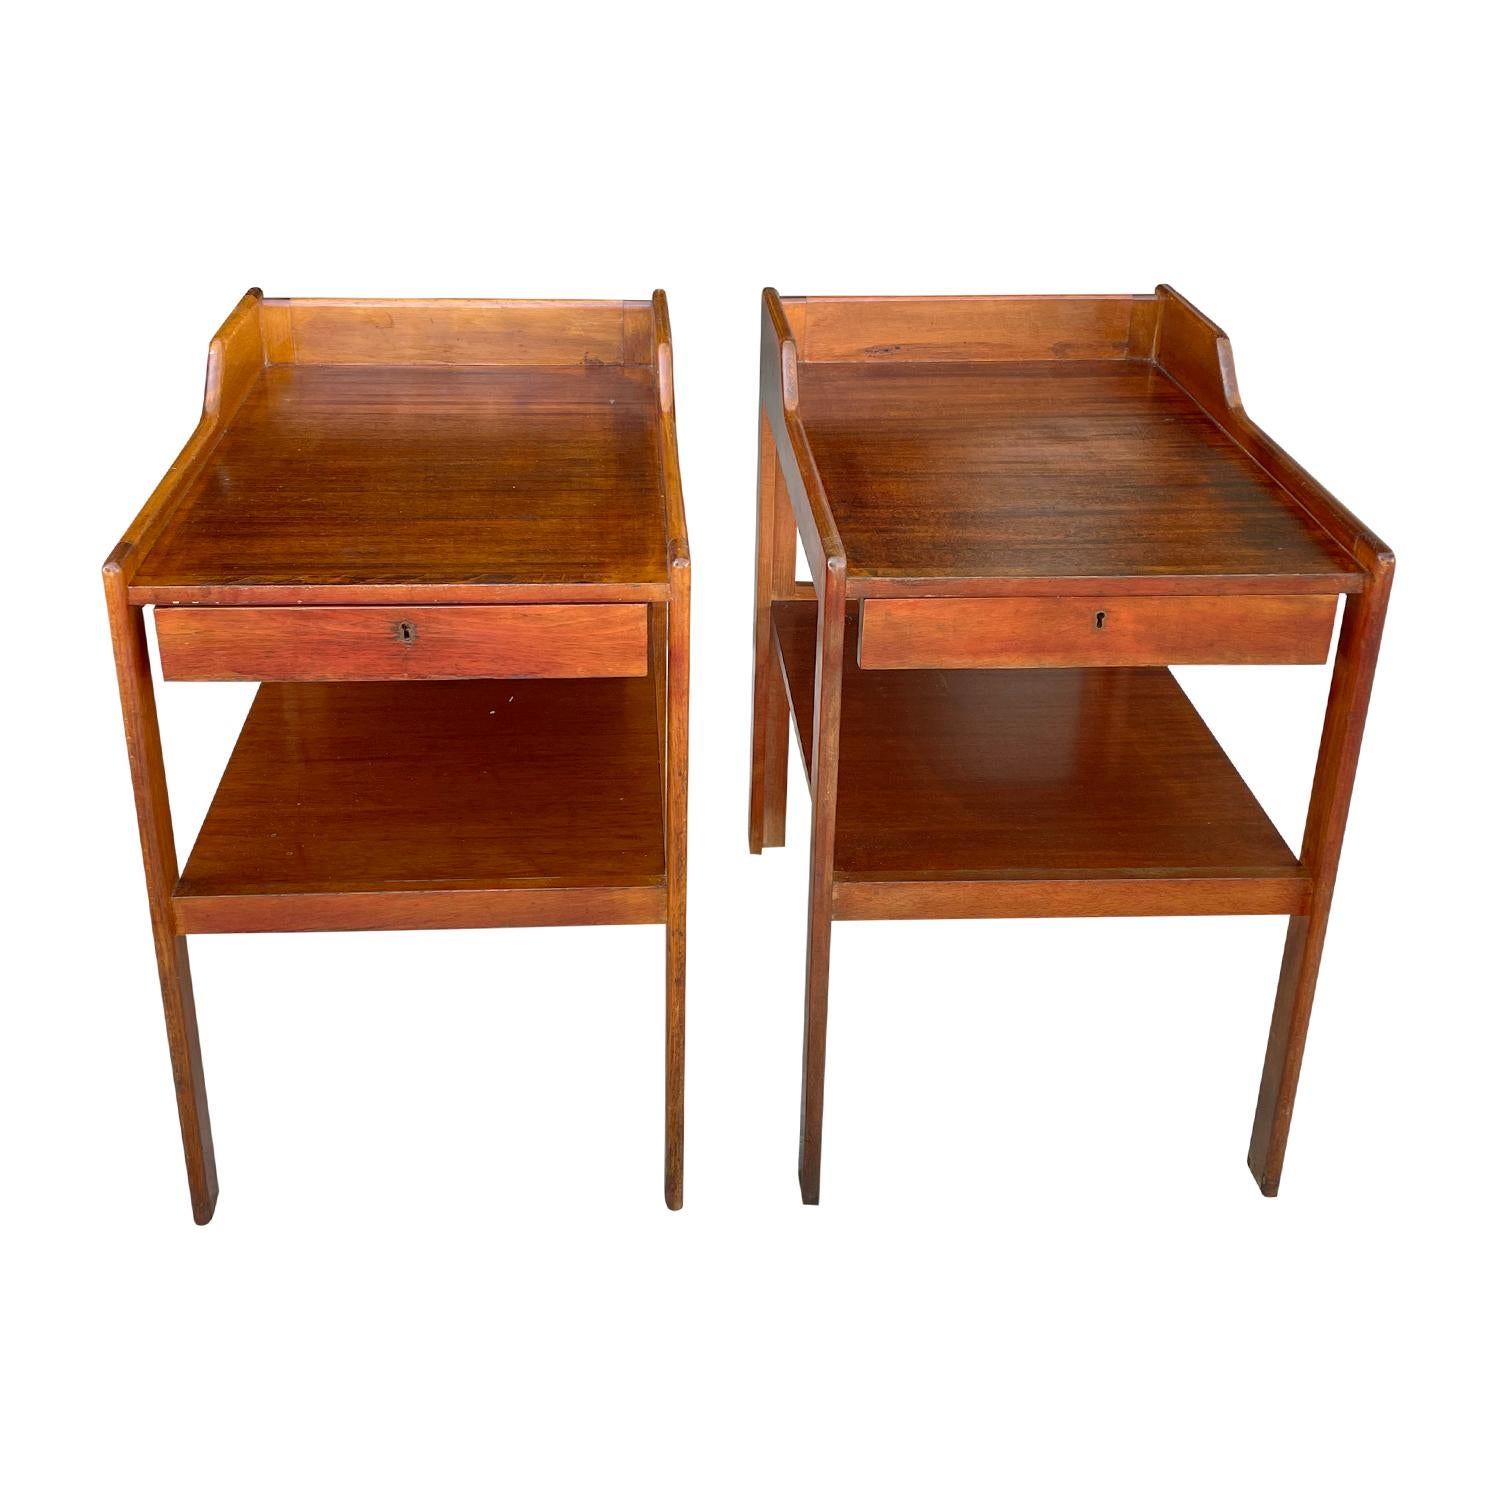 A light-brown, vintage Mid-Century Modern Swedish pair of bedside tables made of hand carved Mahogany, each of them is composed with one drawer, shelf and a brass handle, consisting its original brass hardware and key, standing on four straight